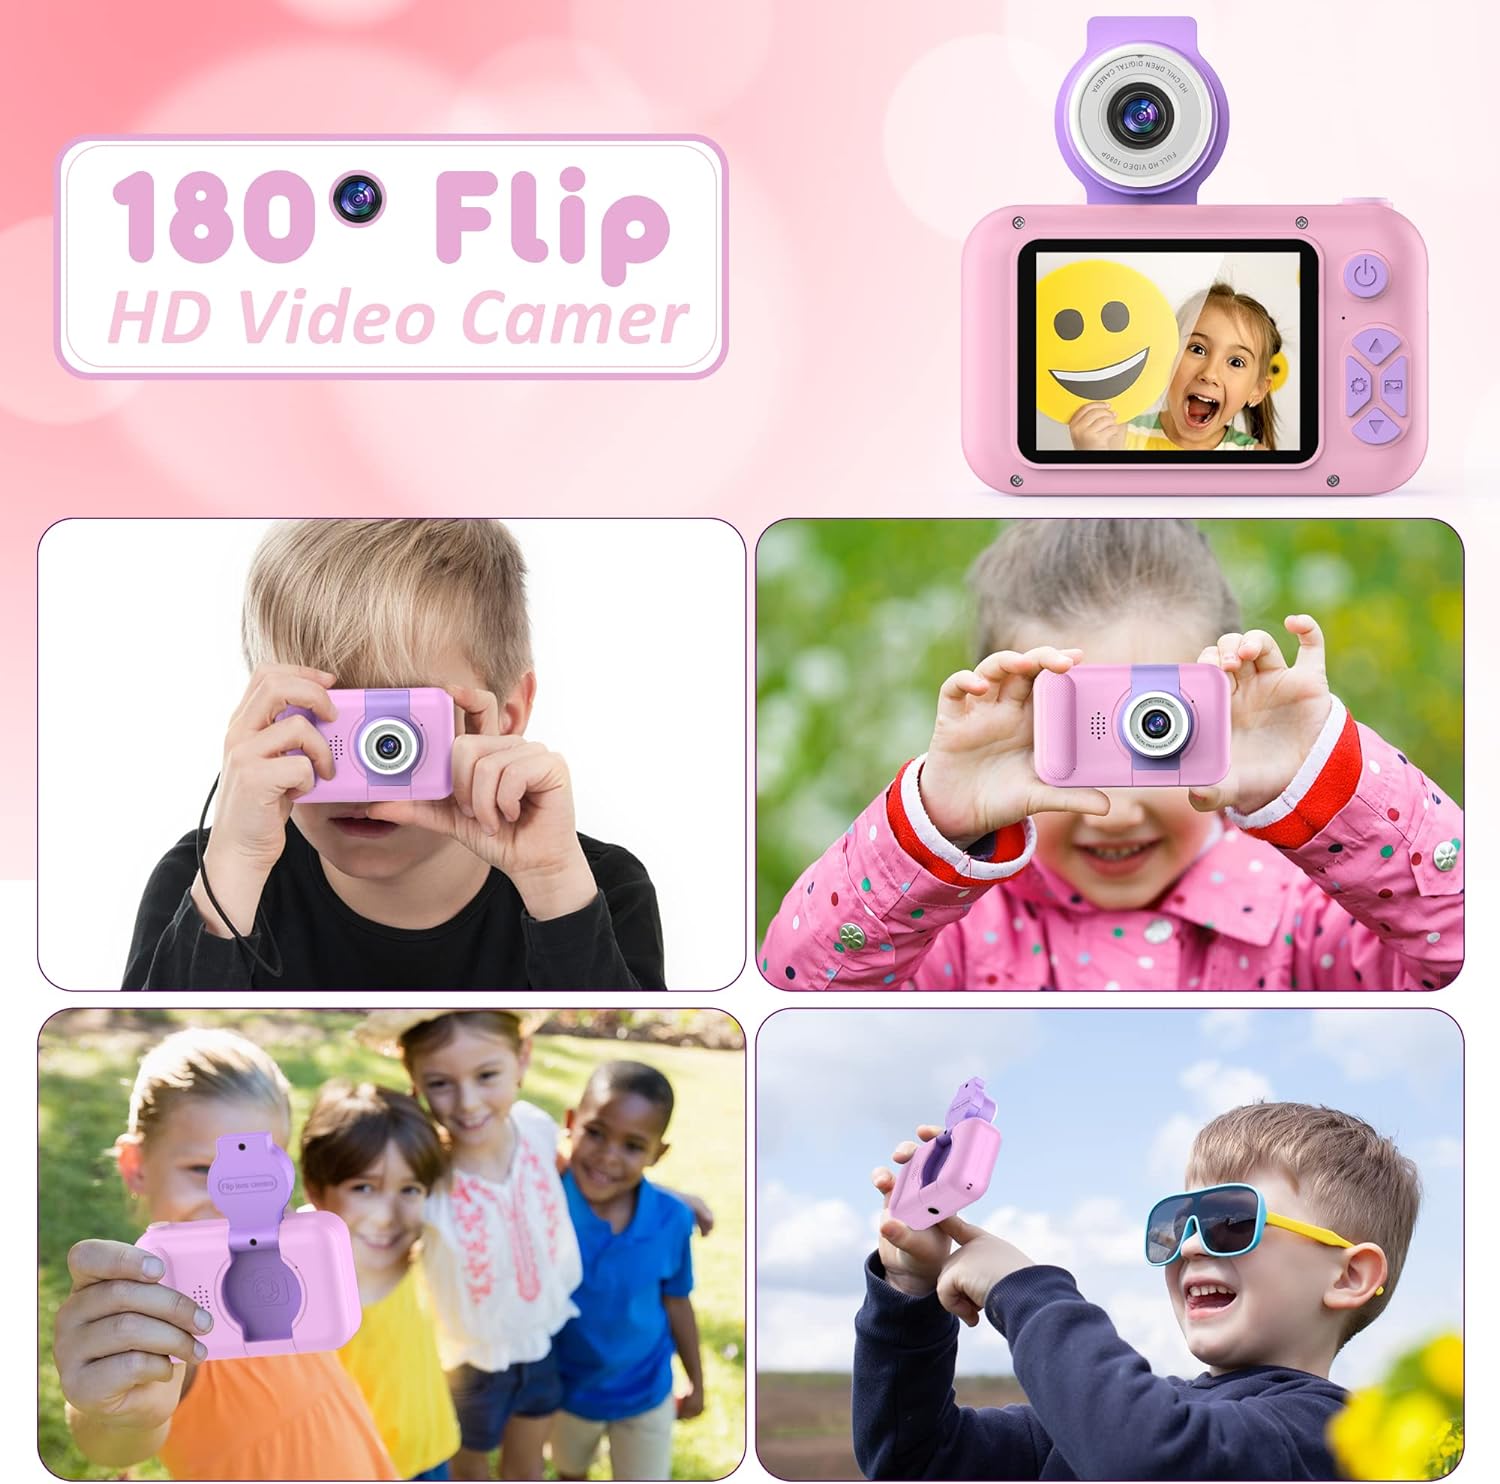 PURULU Kids Camera with 180° Flip-up Lens for Selfie & Video, HD Digital Video Cameras for Toddler with 32GB SD Card, Ideal for 3-8 Years Old Girls Boys on Birthday Christmas Party as Gift